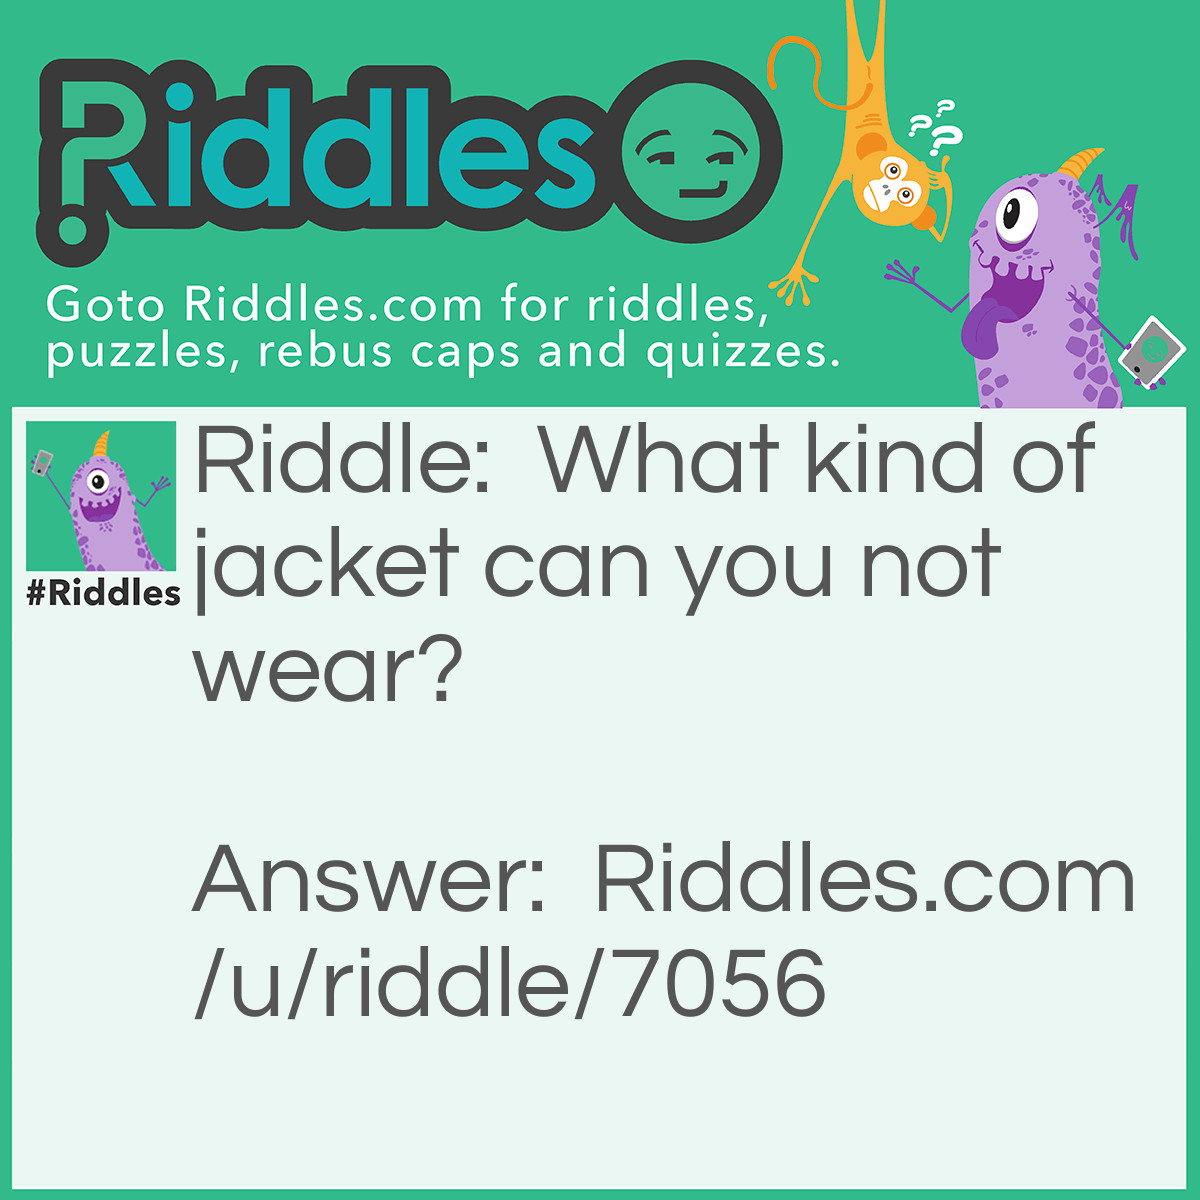 Riddle: What kind of jacket can you not wear? Answer: A metal casing for a bullet.